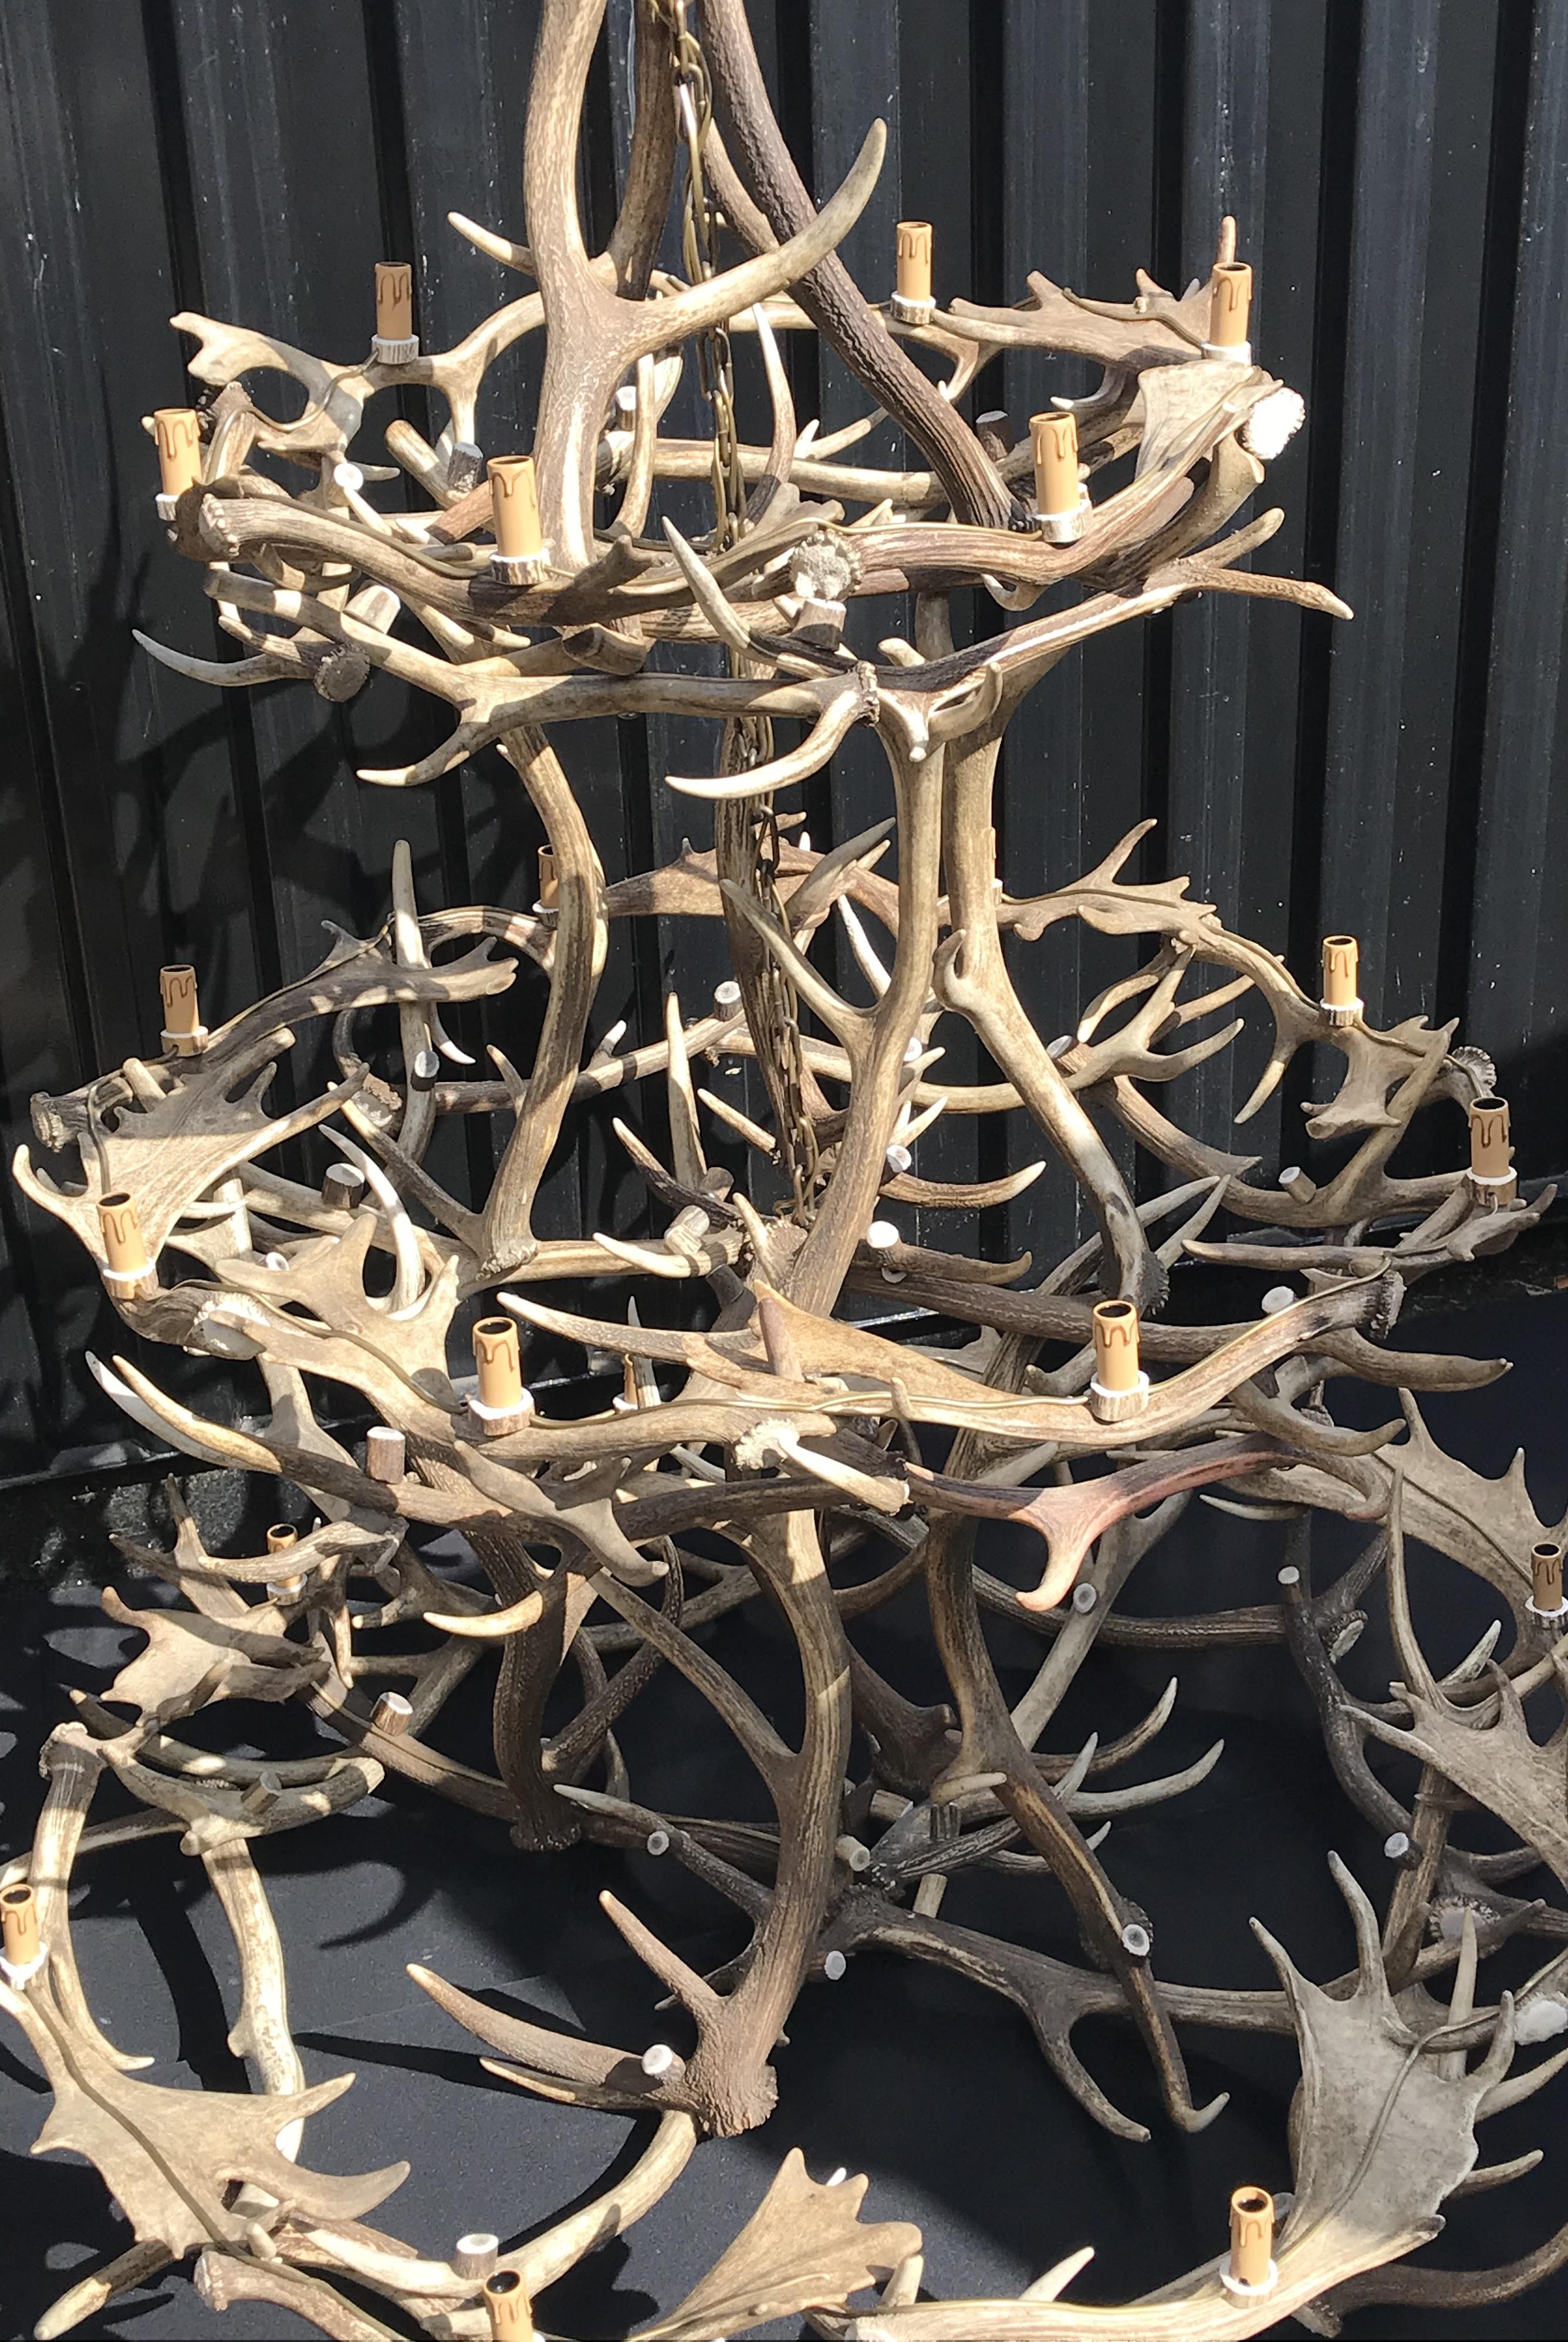 Dutch Imposing Chandelier Made of Antlers